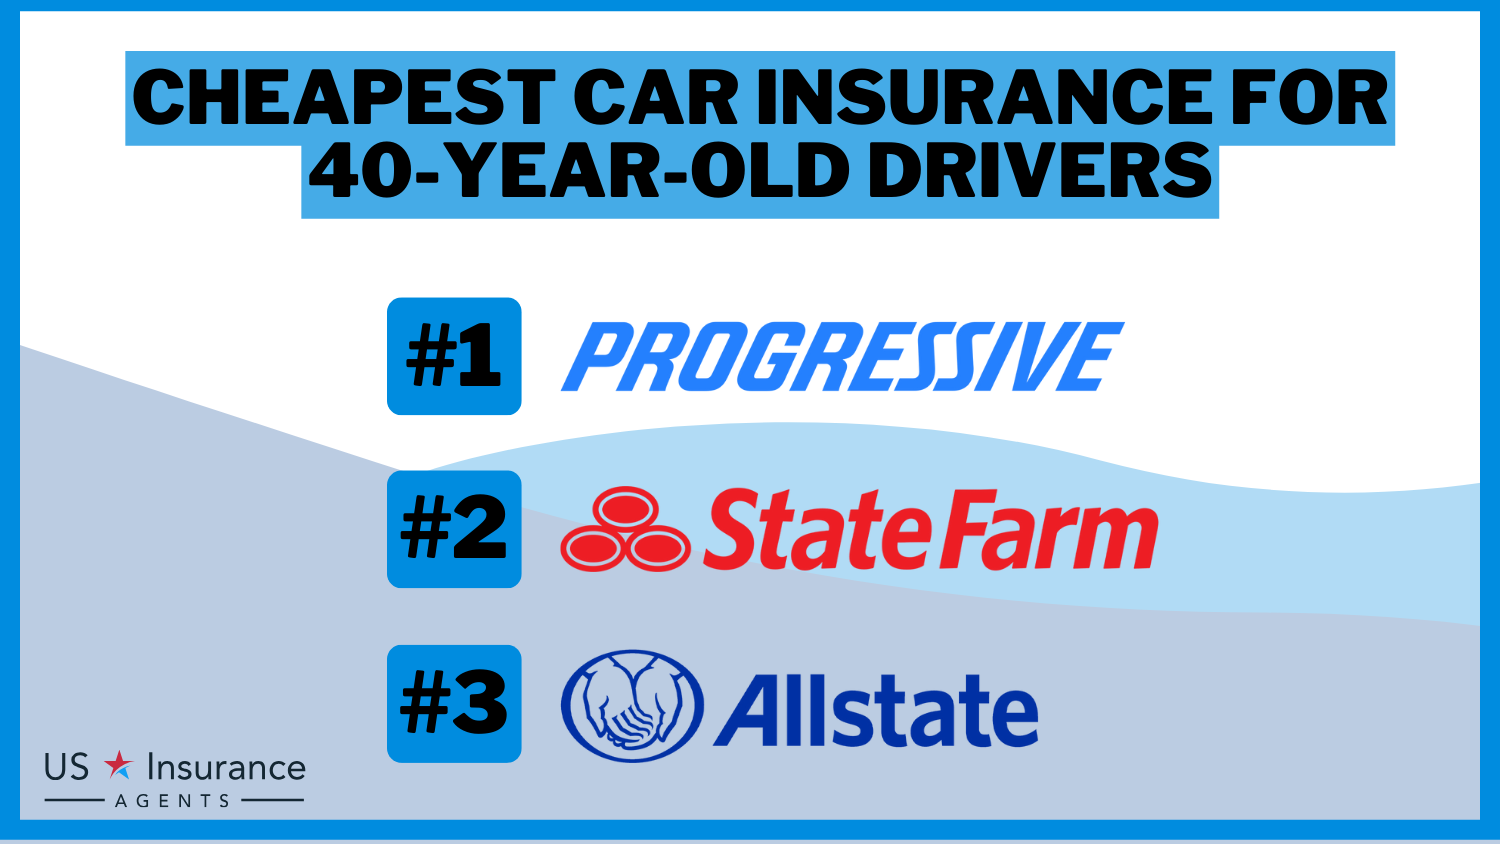 Cheapest Car Insurance for 40-Year-Old Drivers: Progressive, State Farm, and Allstate